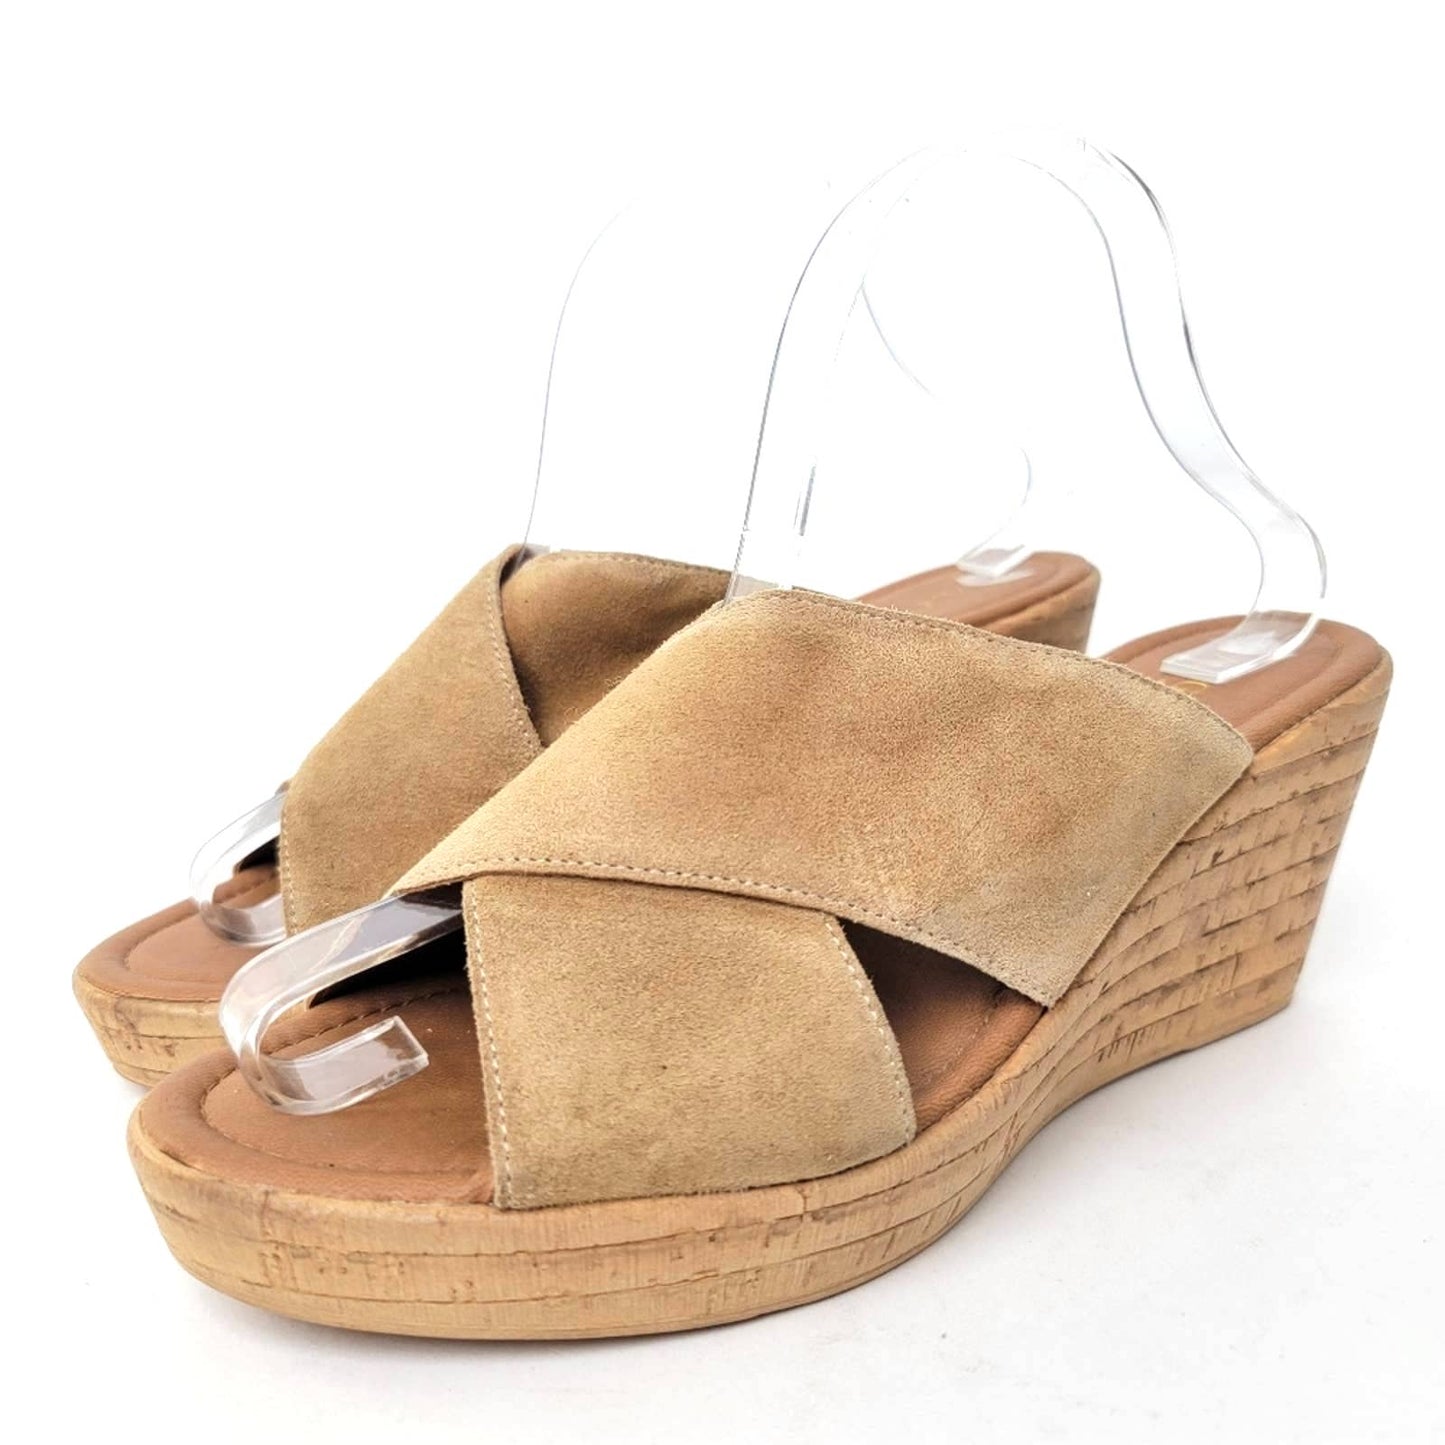 A Giannetti Suede Open Toe Cork Wedge Sandals - 9.5